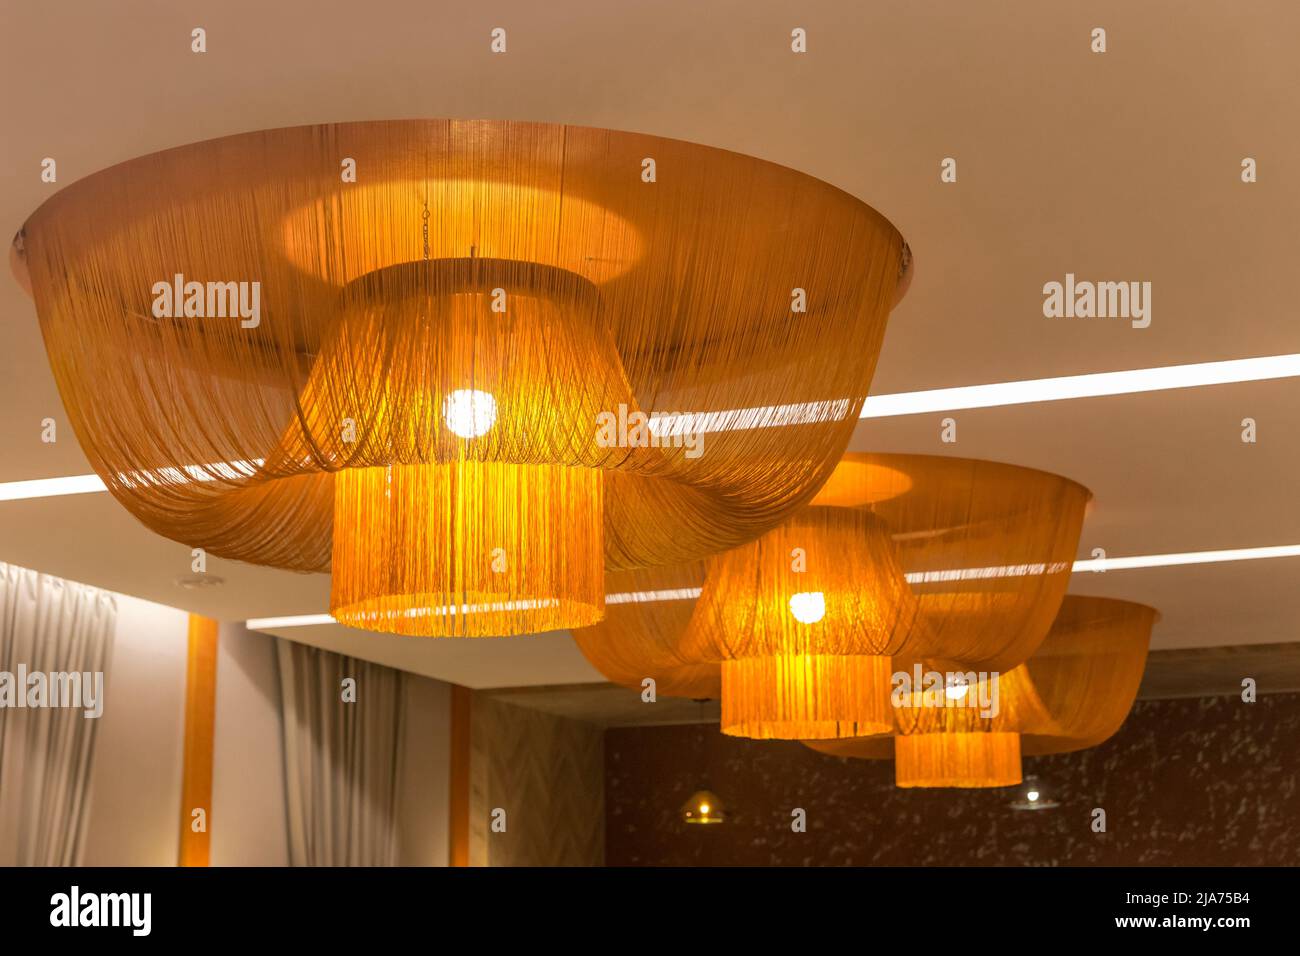 Modern ceiling interior design with vintage orange fabric decorations chandelier light abstract decor room. Stock Photo